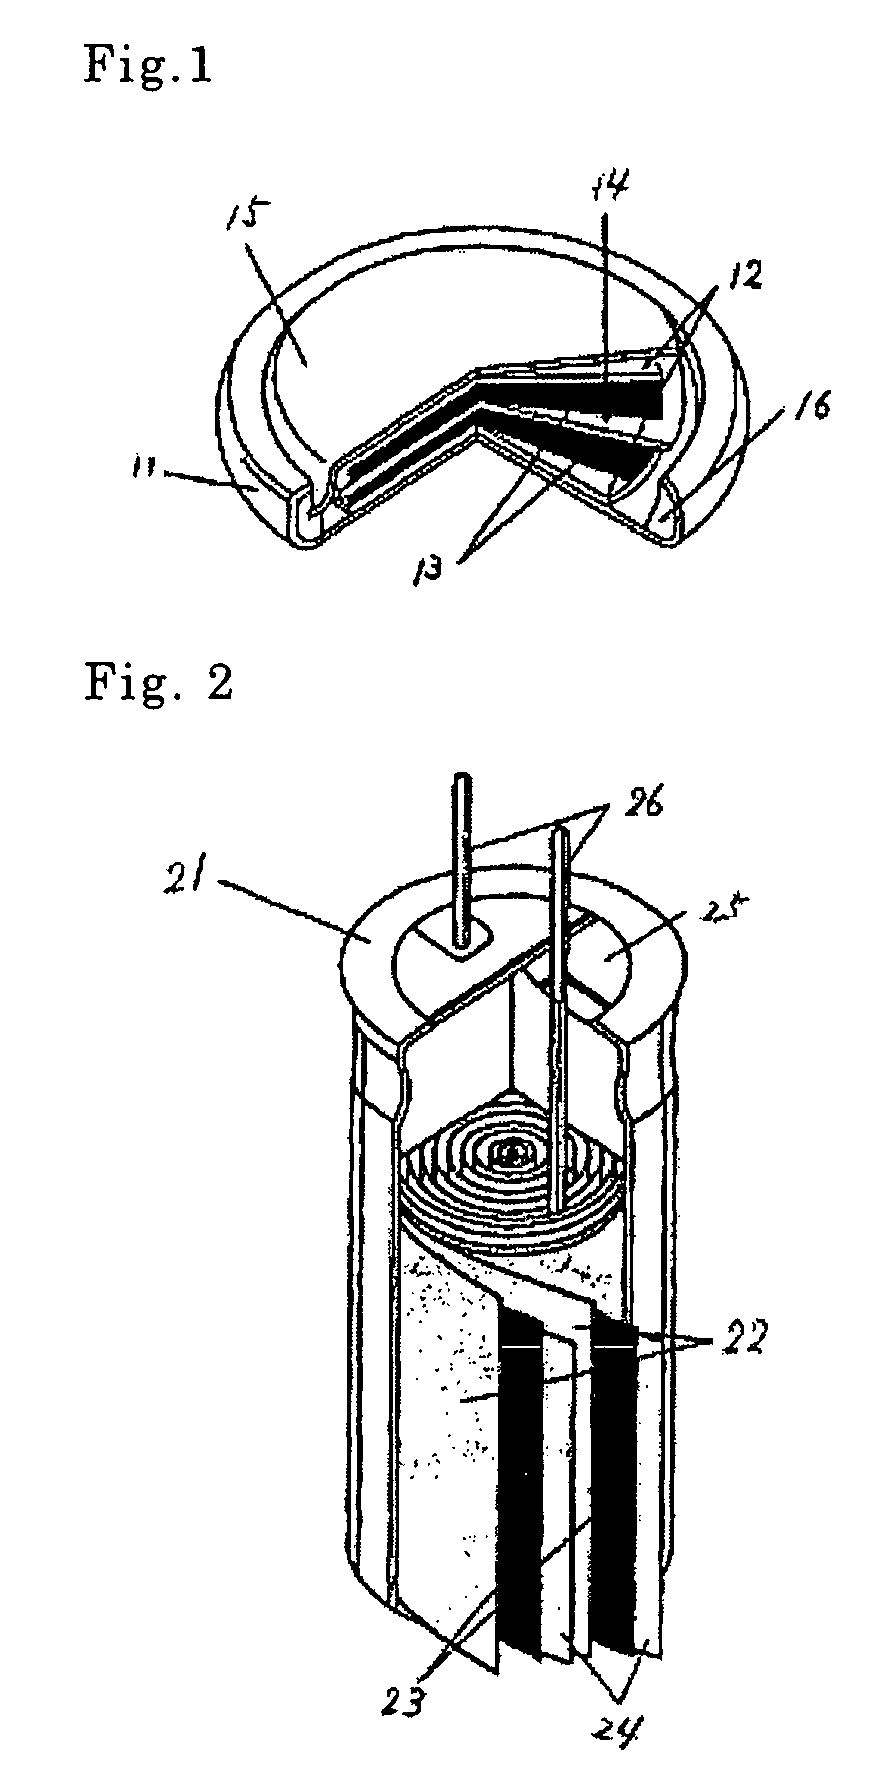 Electric double-layer capacitor